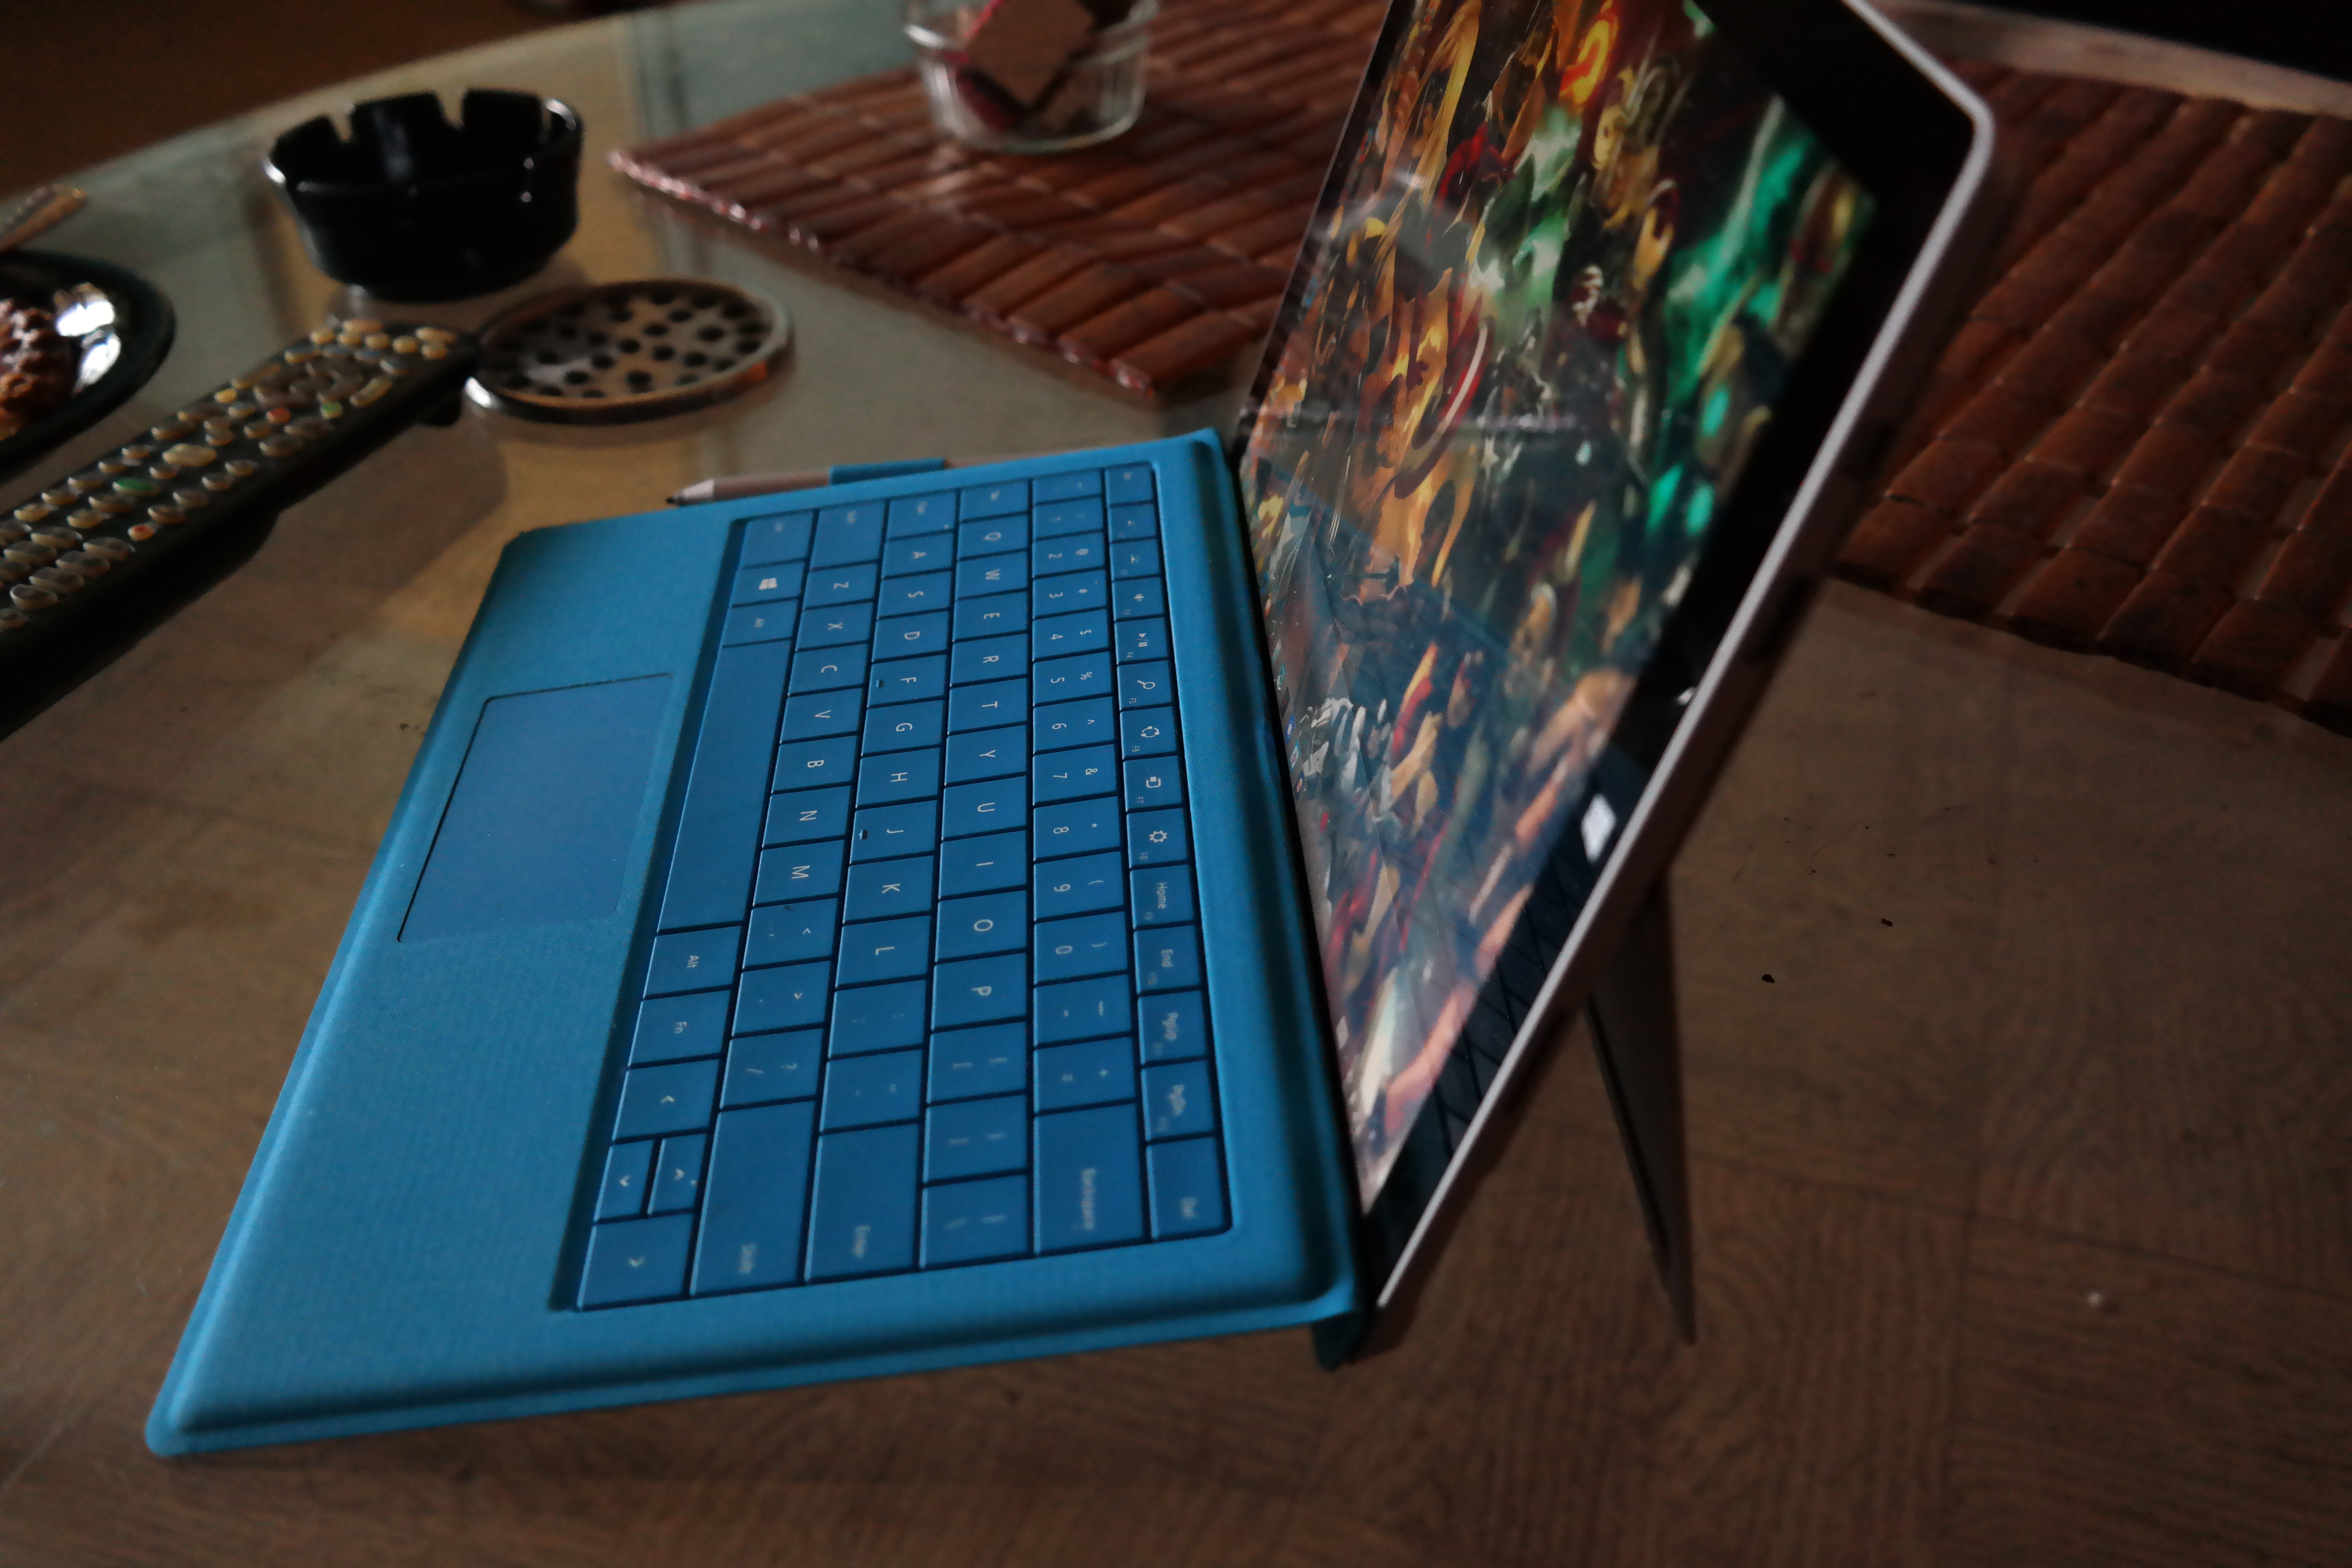 microsoft surface pro 5 review